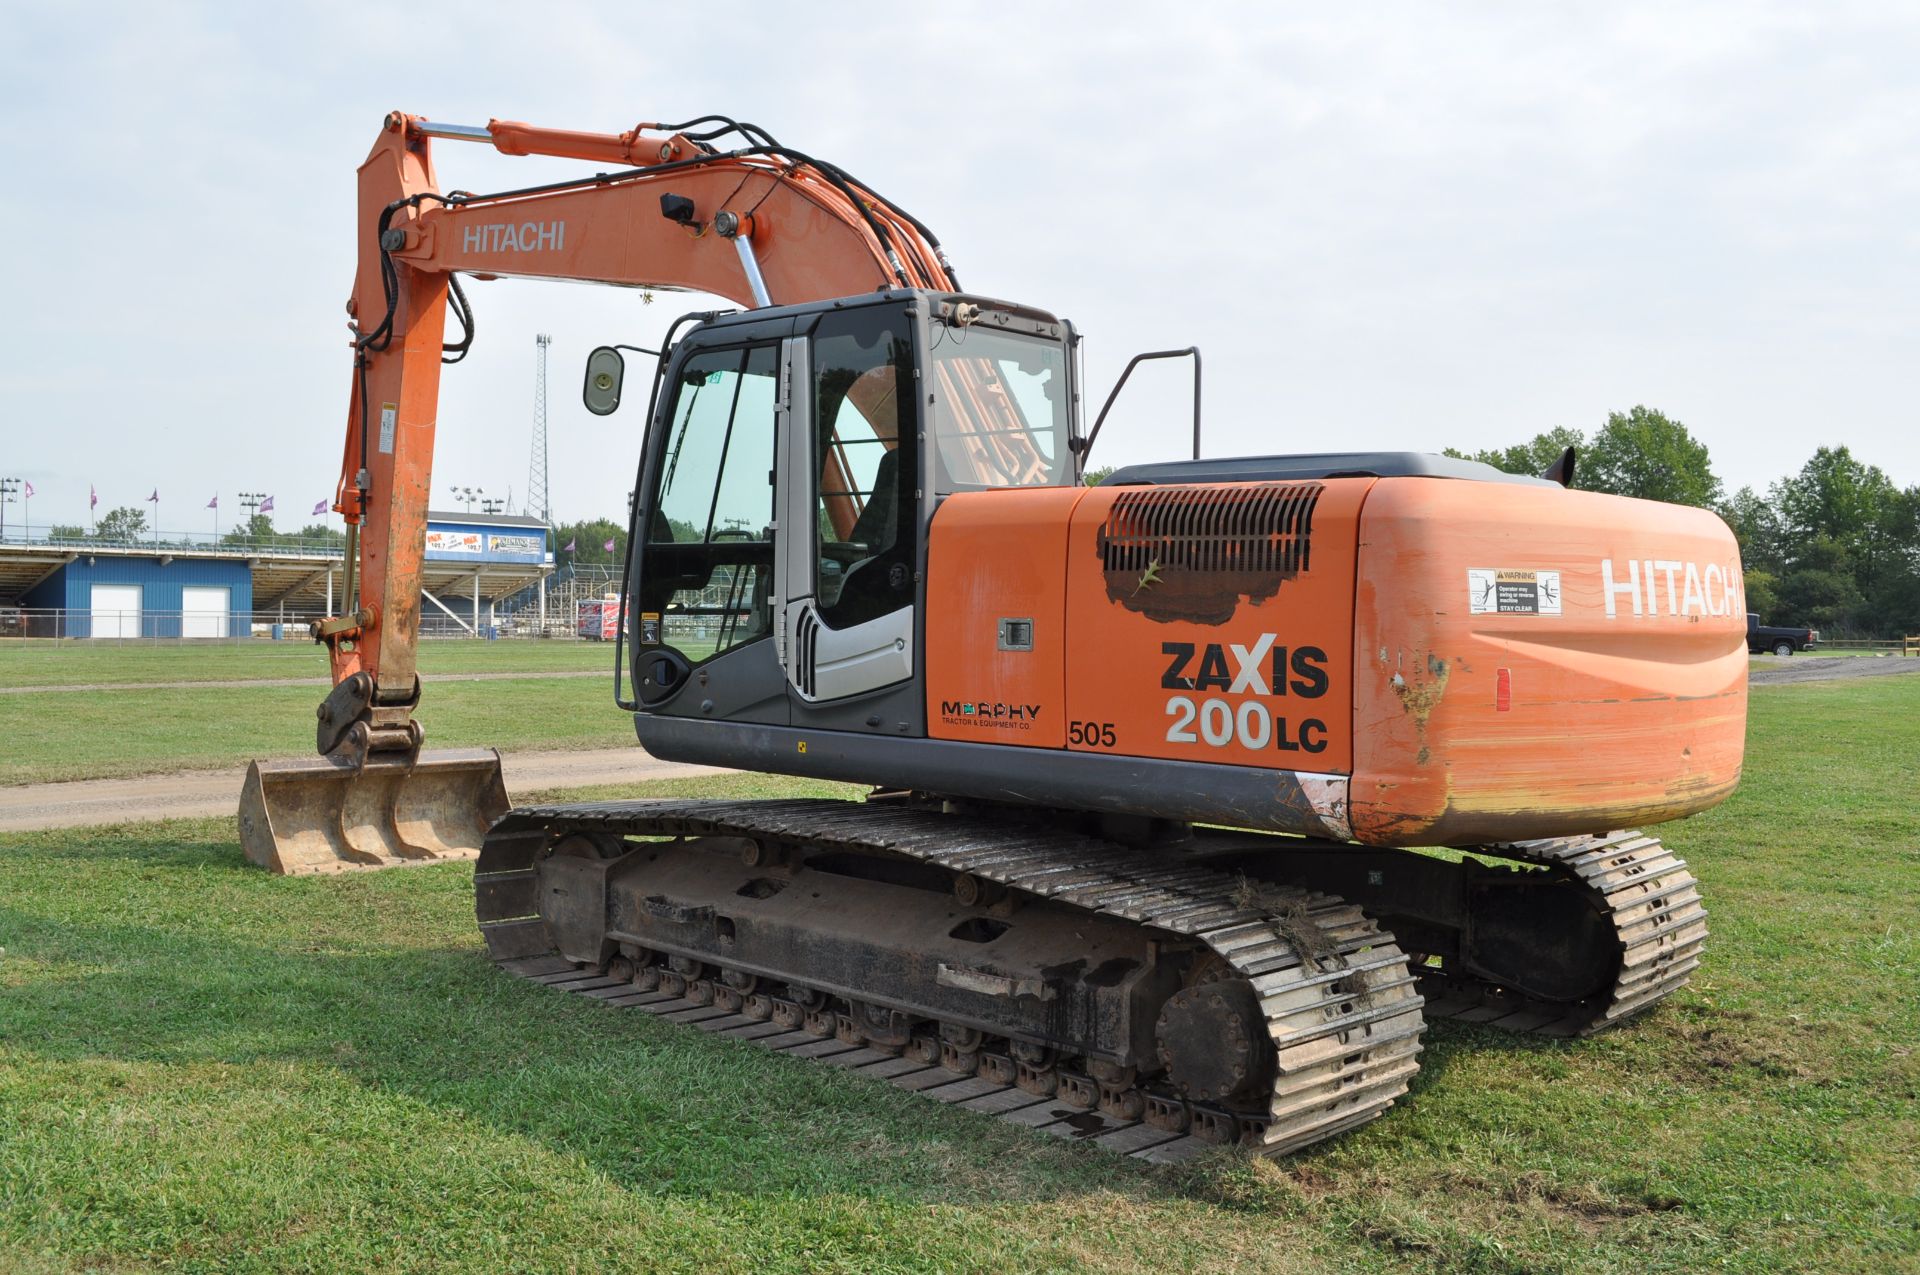 Hitachi ZX 200 LC-3 excavator, 32” steel pads, C/H/A, 72” smooth bucket, hyd coupler, aux boom hyd - Image 4 of 34